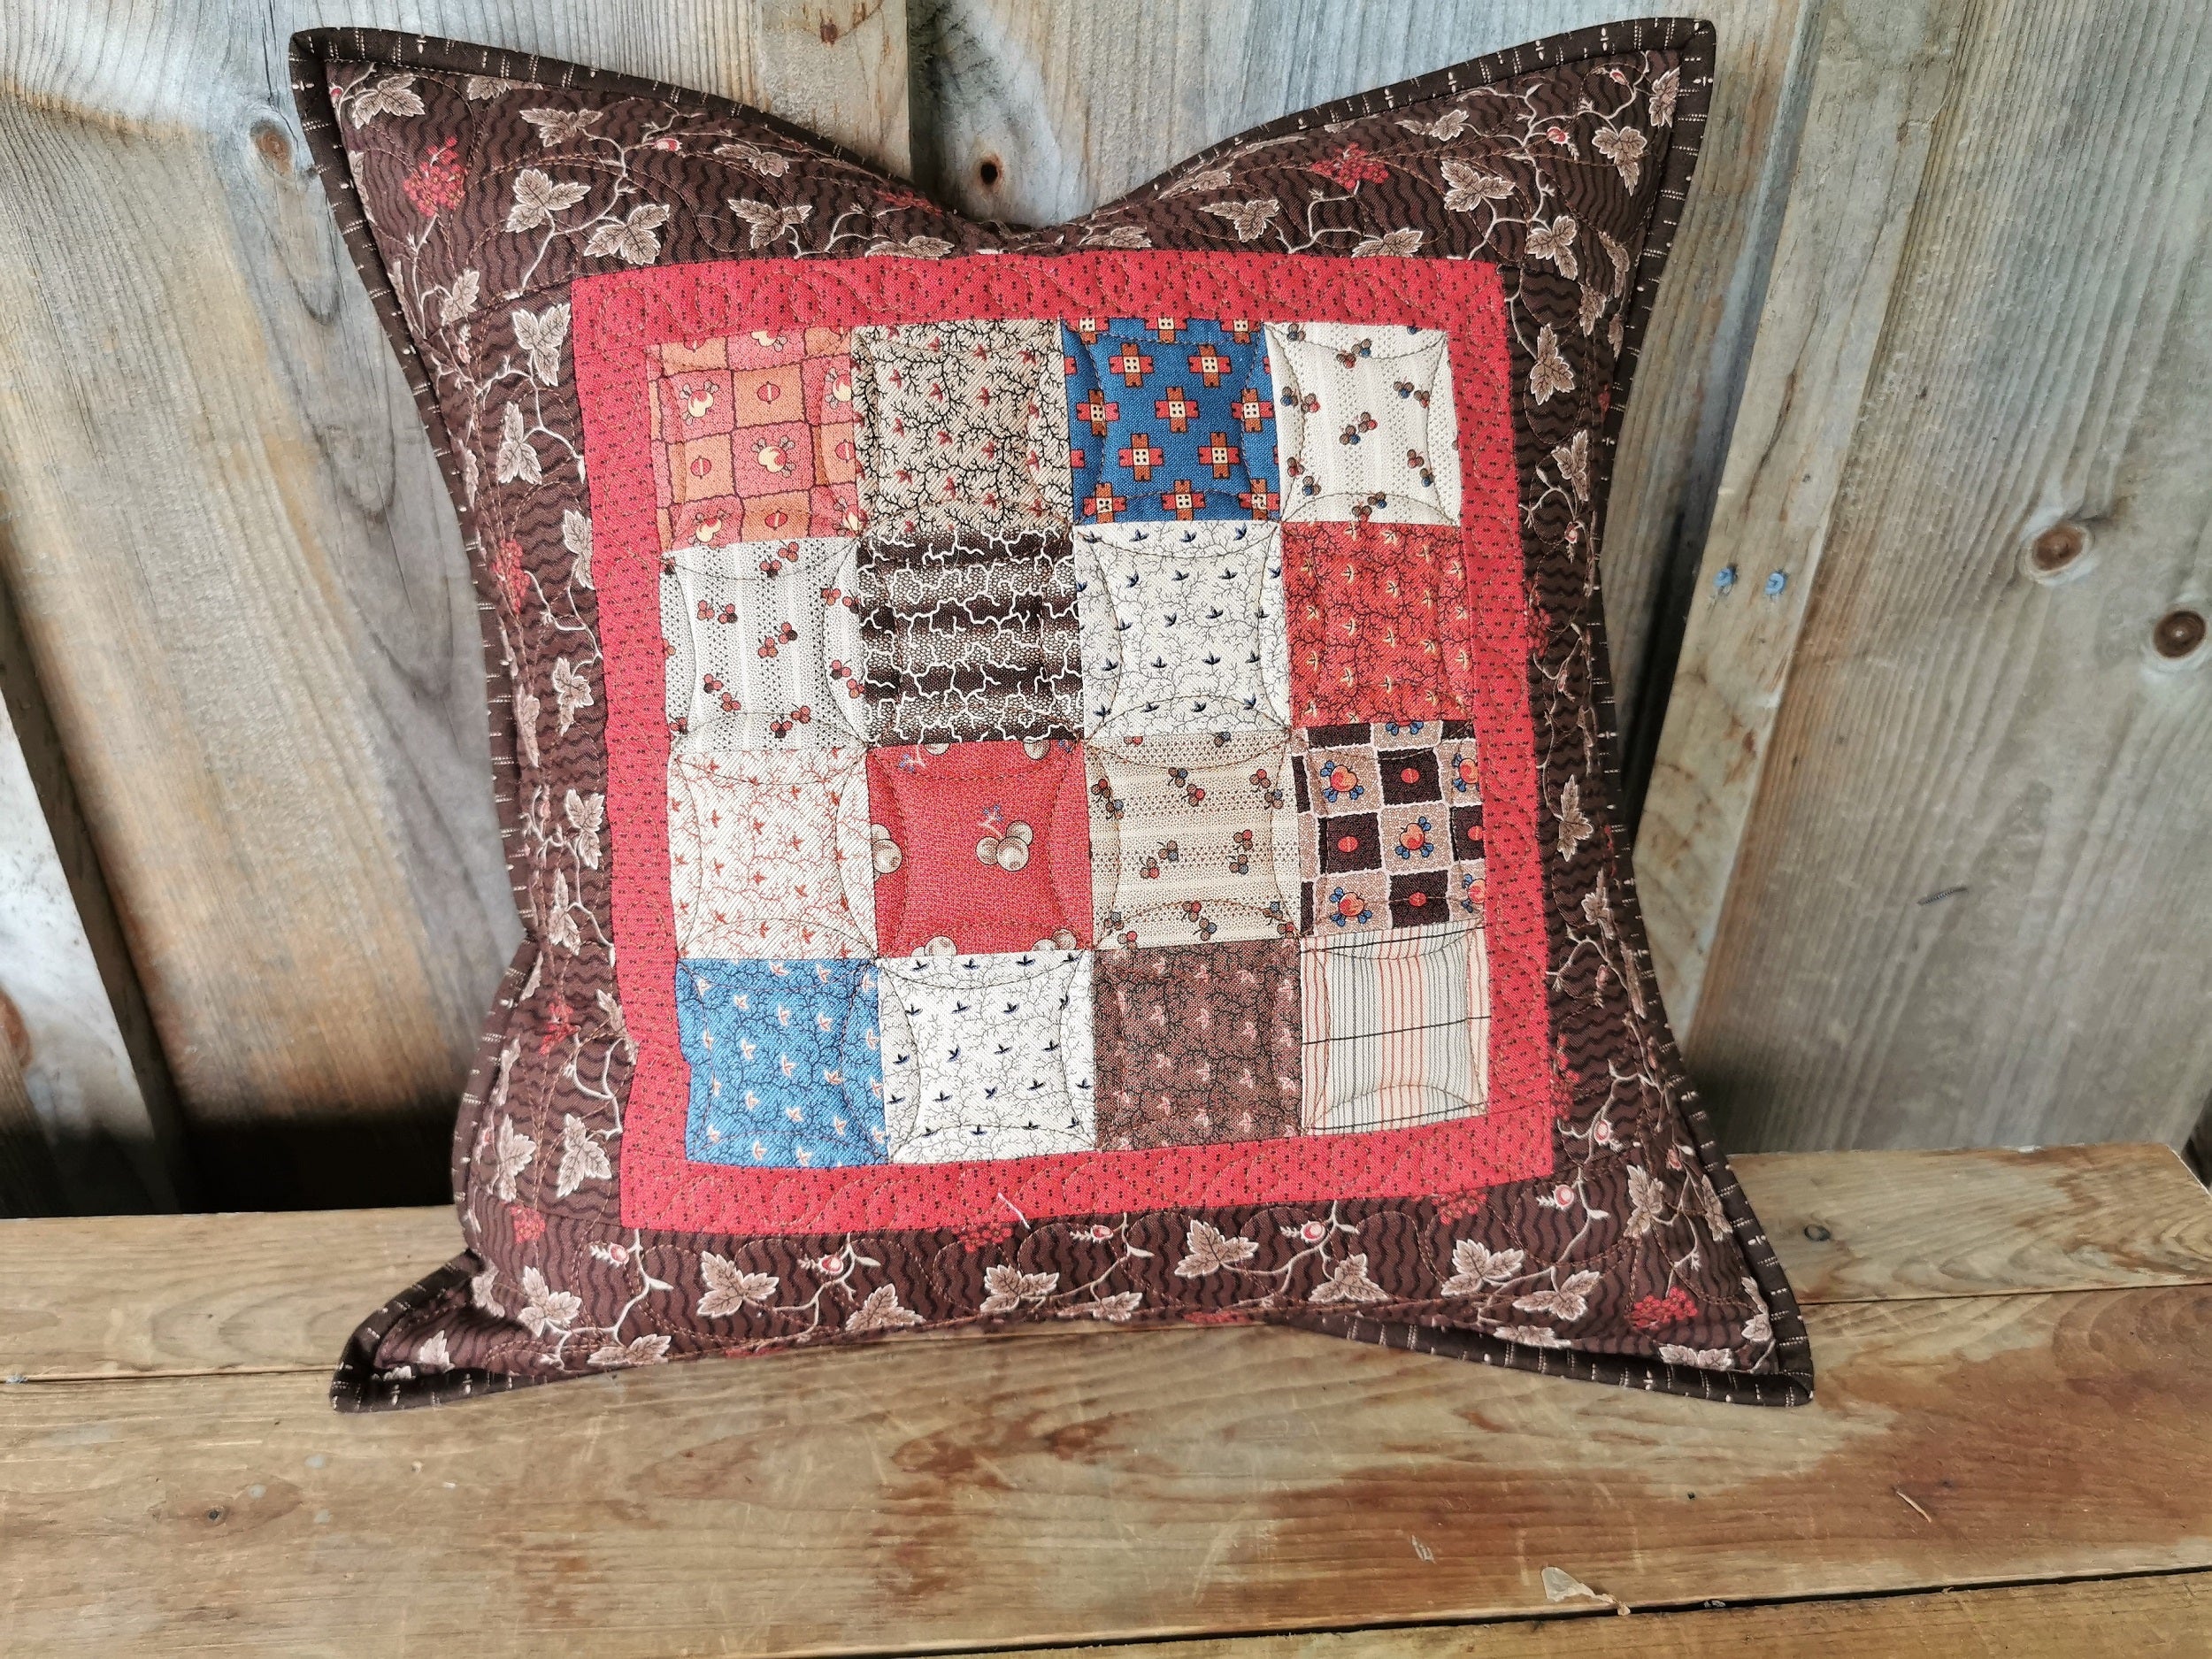 this is a coordinating patchwork pillow, sold separately